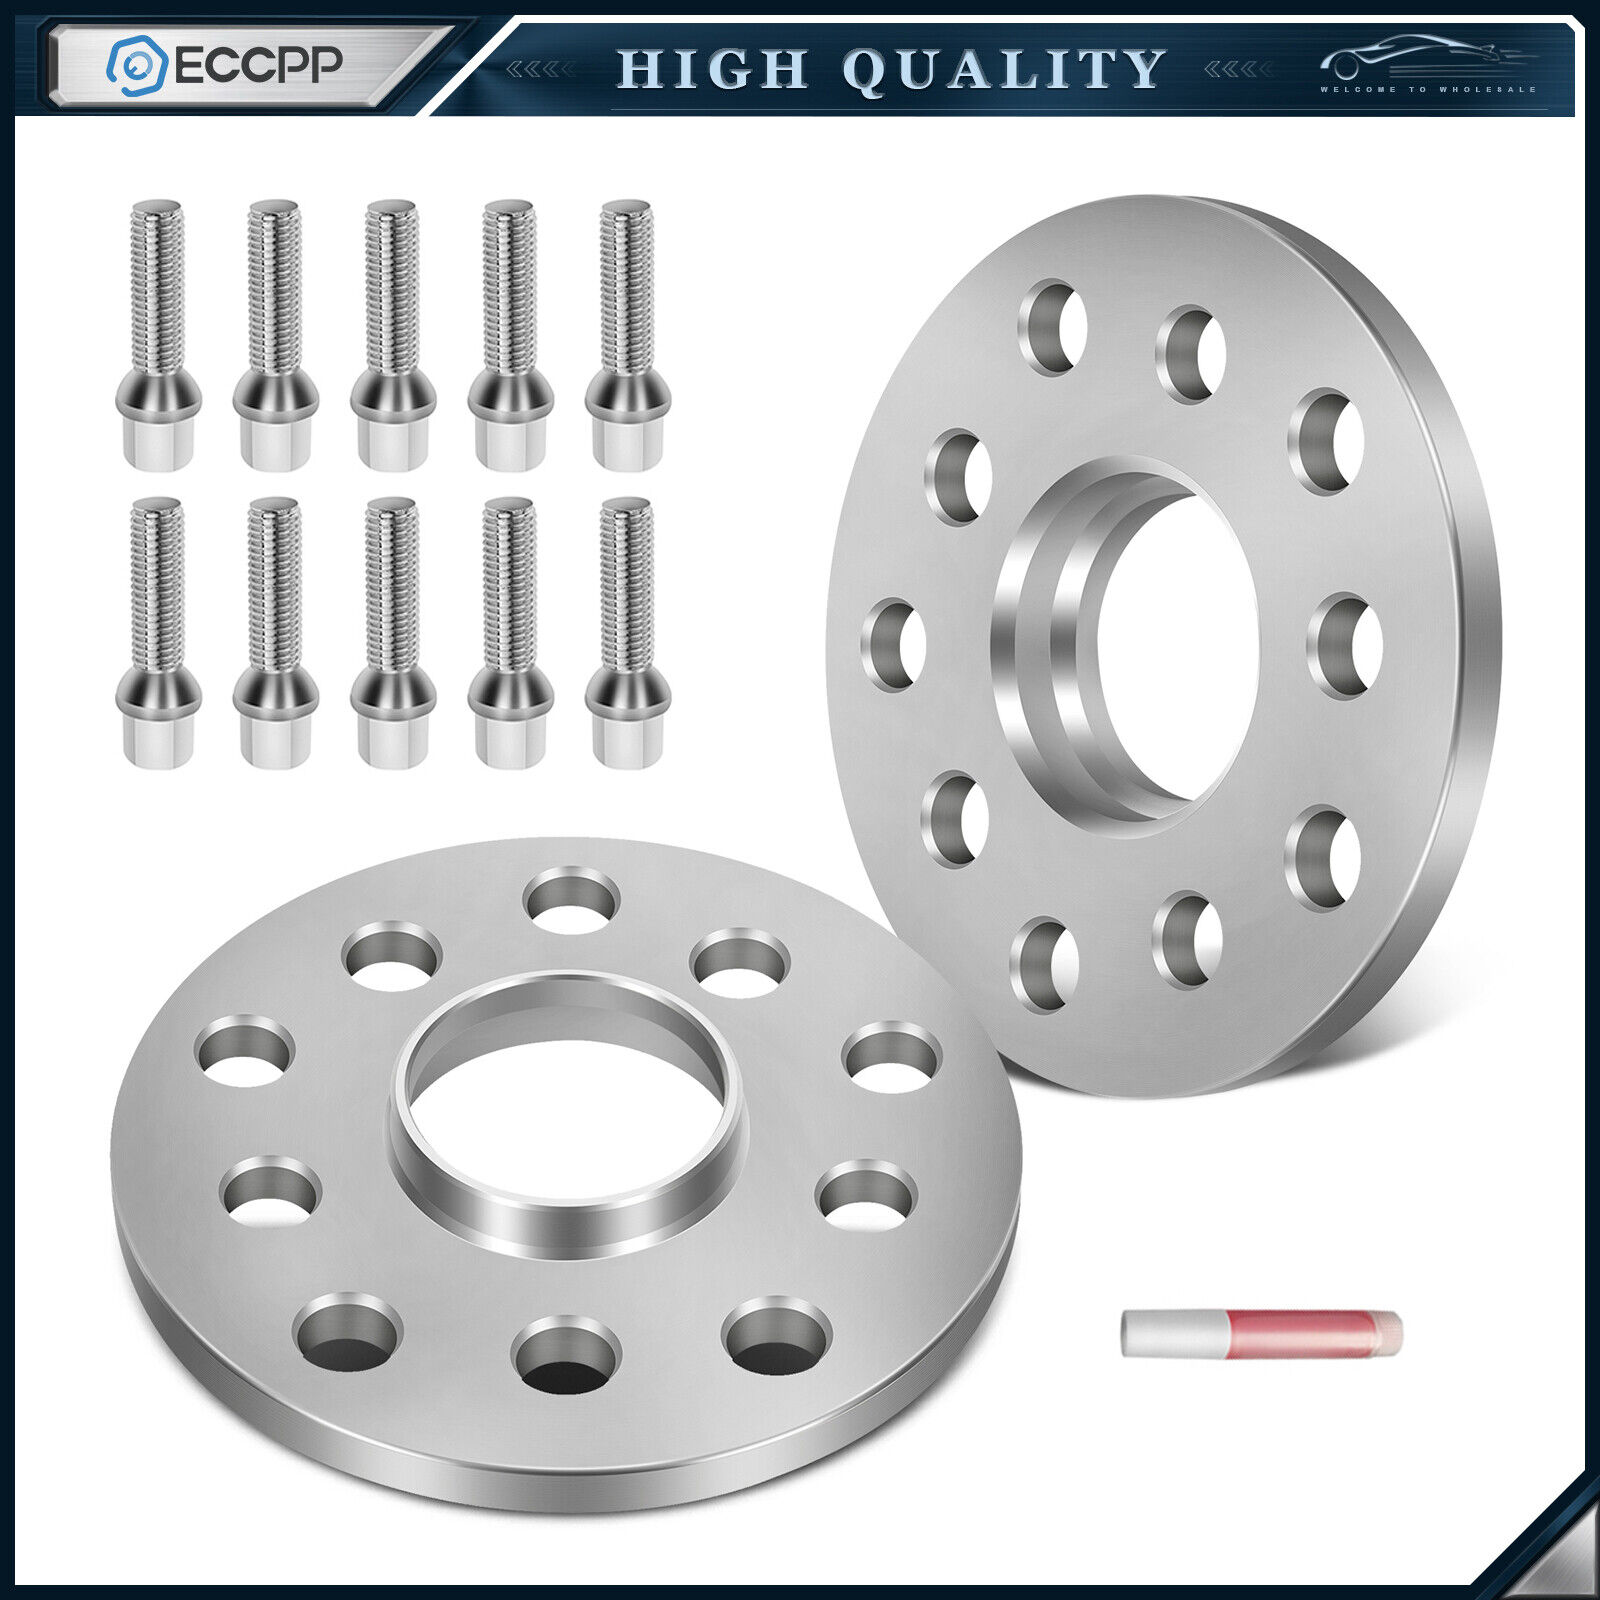 2 Pcs 10mm 5x100 or 5x112 Hub Centric Wheel Spacers 14x1.5 For Volkswagen Audi